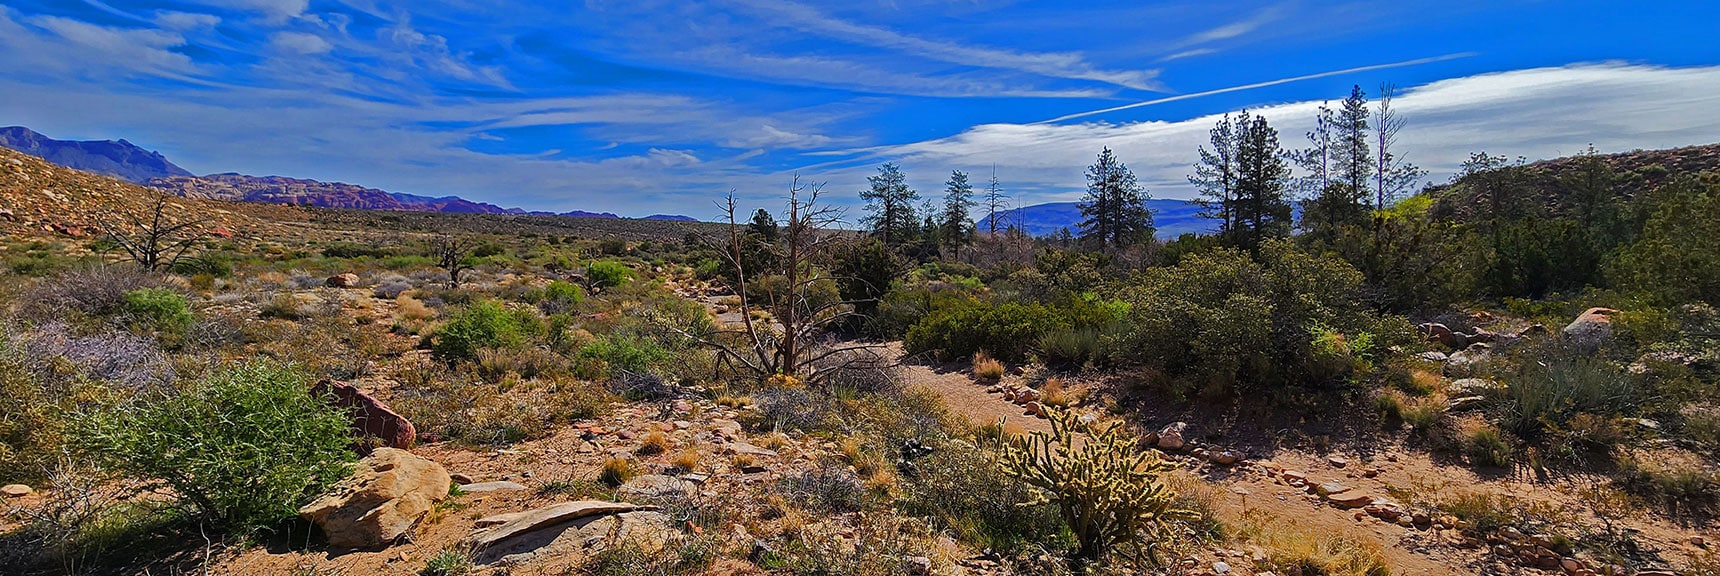 Short Stretch Down Pine Creek Canyon Trail to Dales Southern Trailhead | Knoll Trail | Red Rock Canyon National Conservation Area, Nevada | David Smith | LasVegasAreaTrails.com